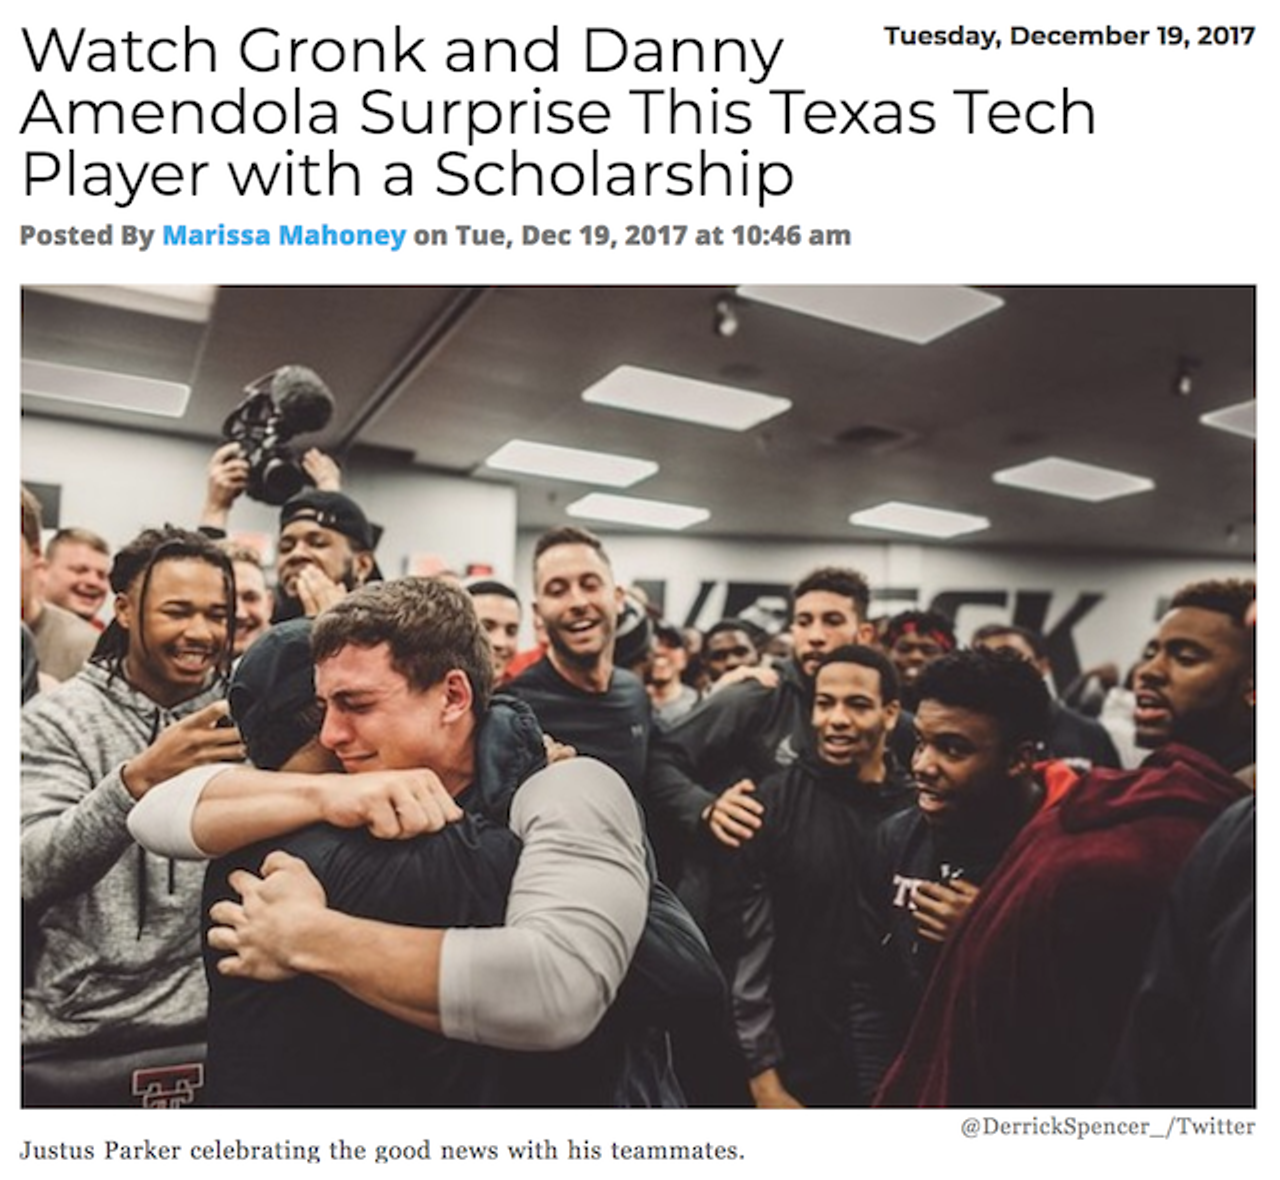 Texas Tech safety Justus Parker got the scholarship of a lifetime from NFL superstars Rob Gronkowski and Danny Amendola of the New England Patriots. Read more.